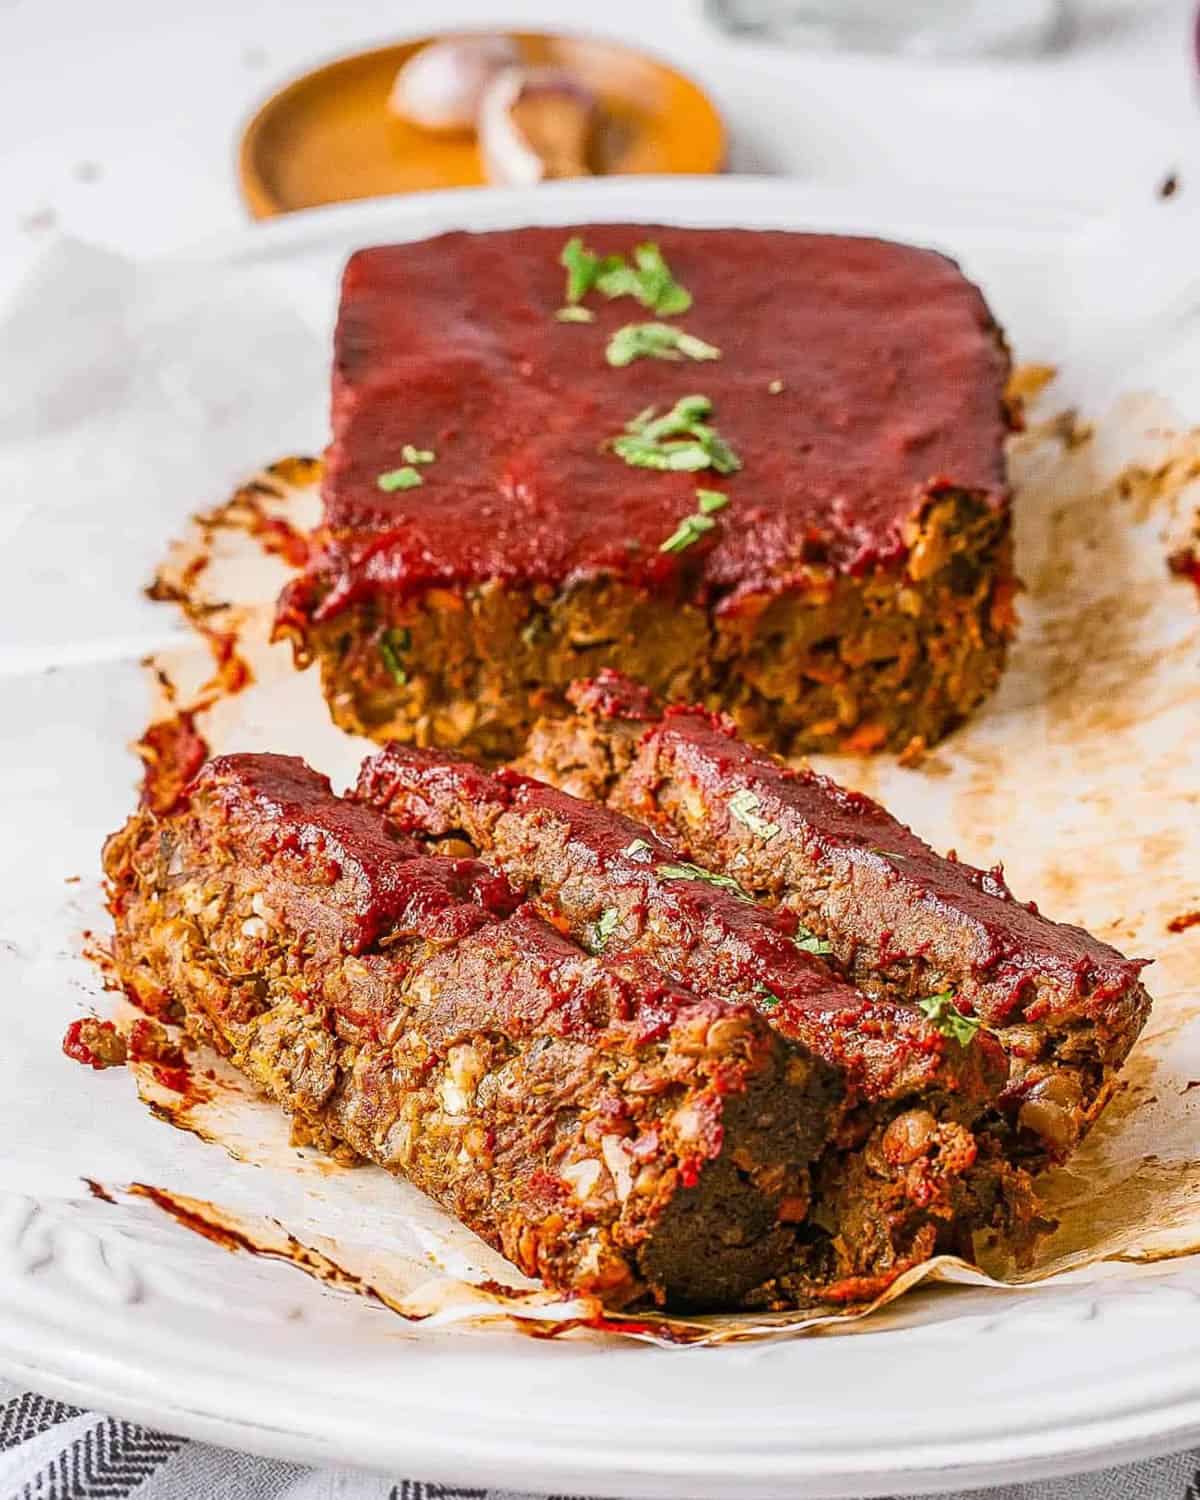 Vegan meatloaf served on a white plate with a gravy on top.